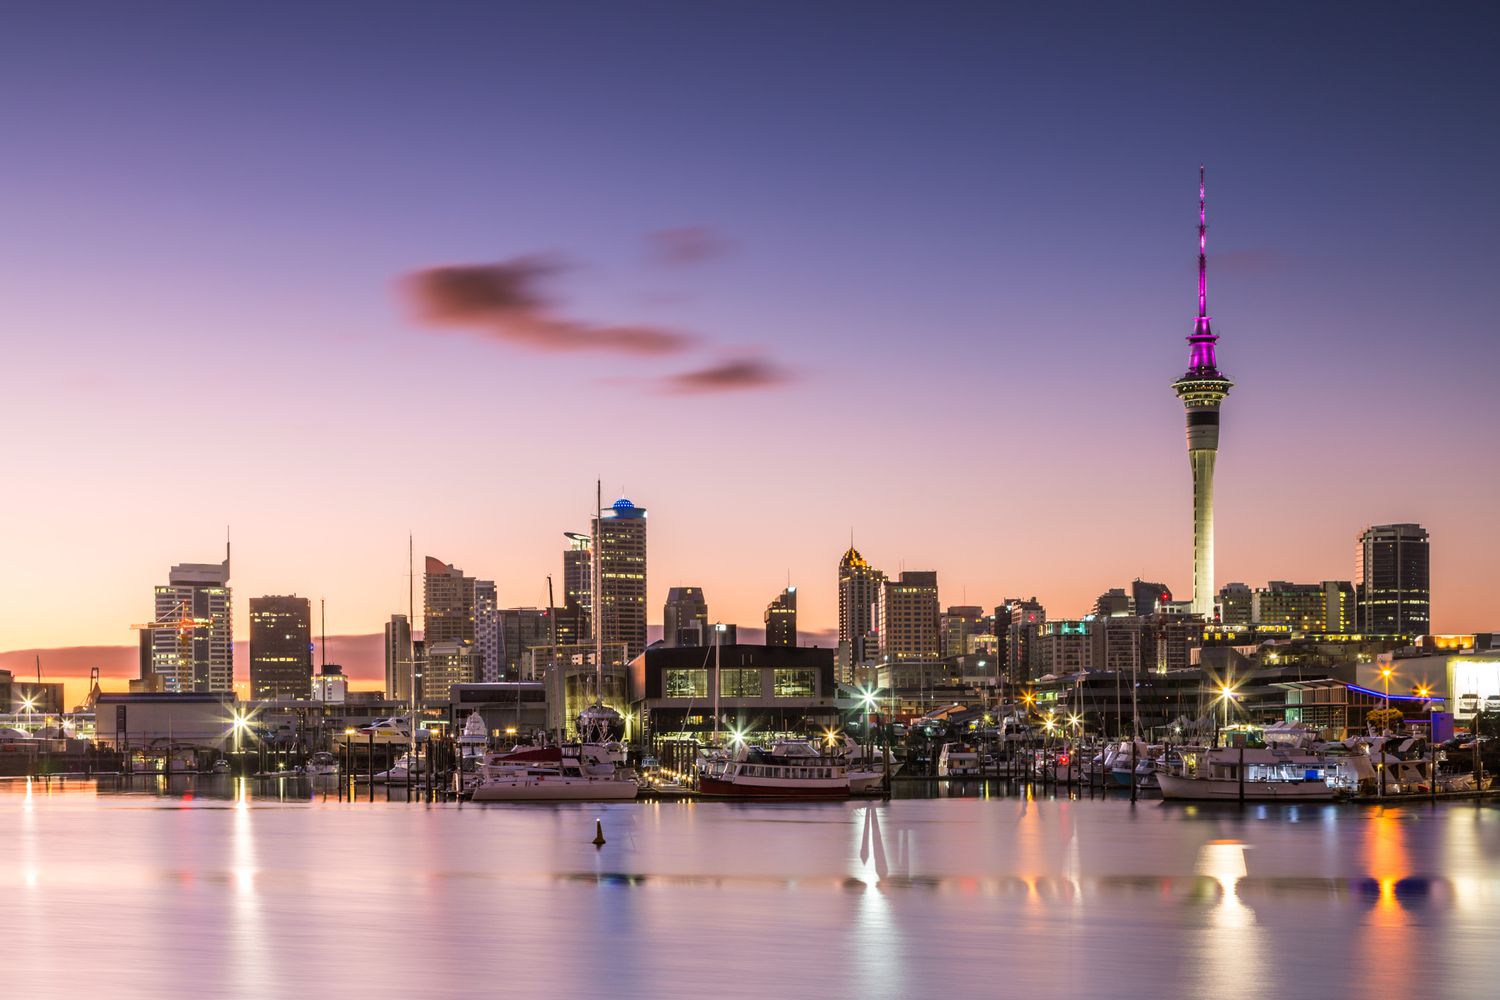 33 interesting facts about New Zealand